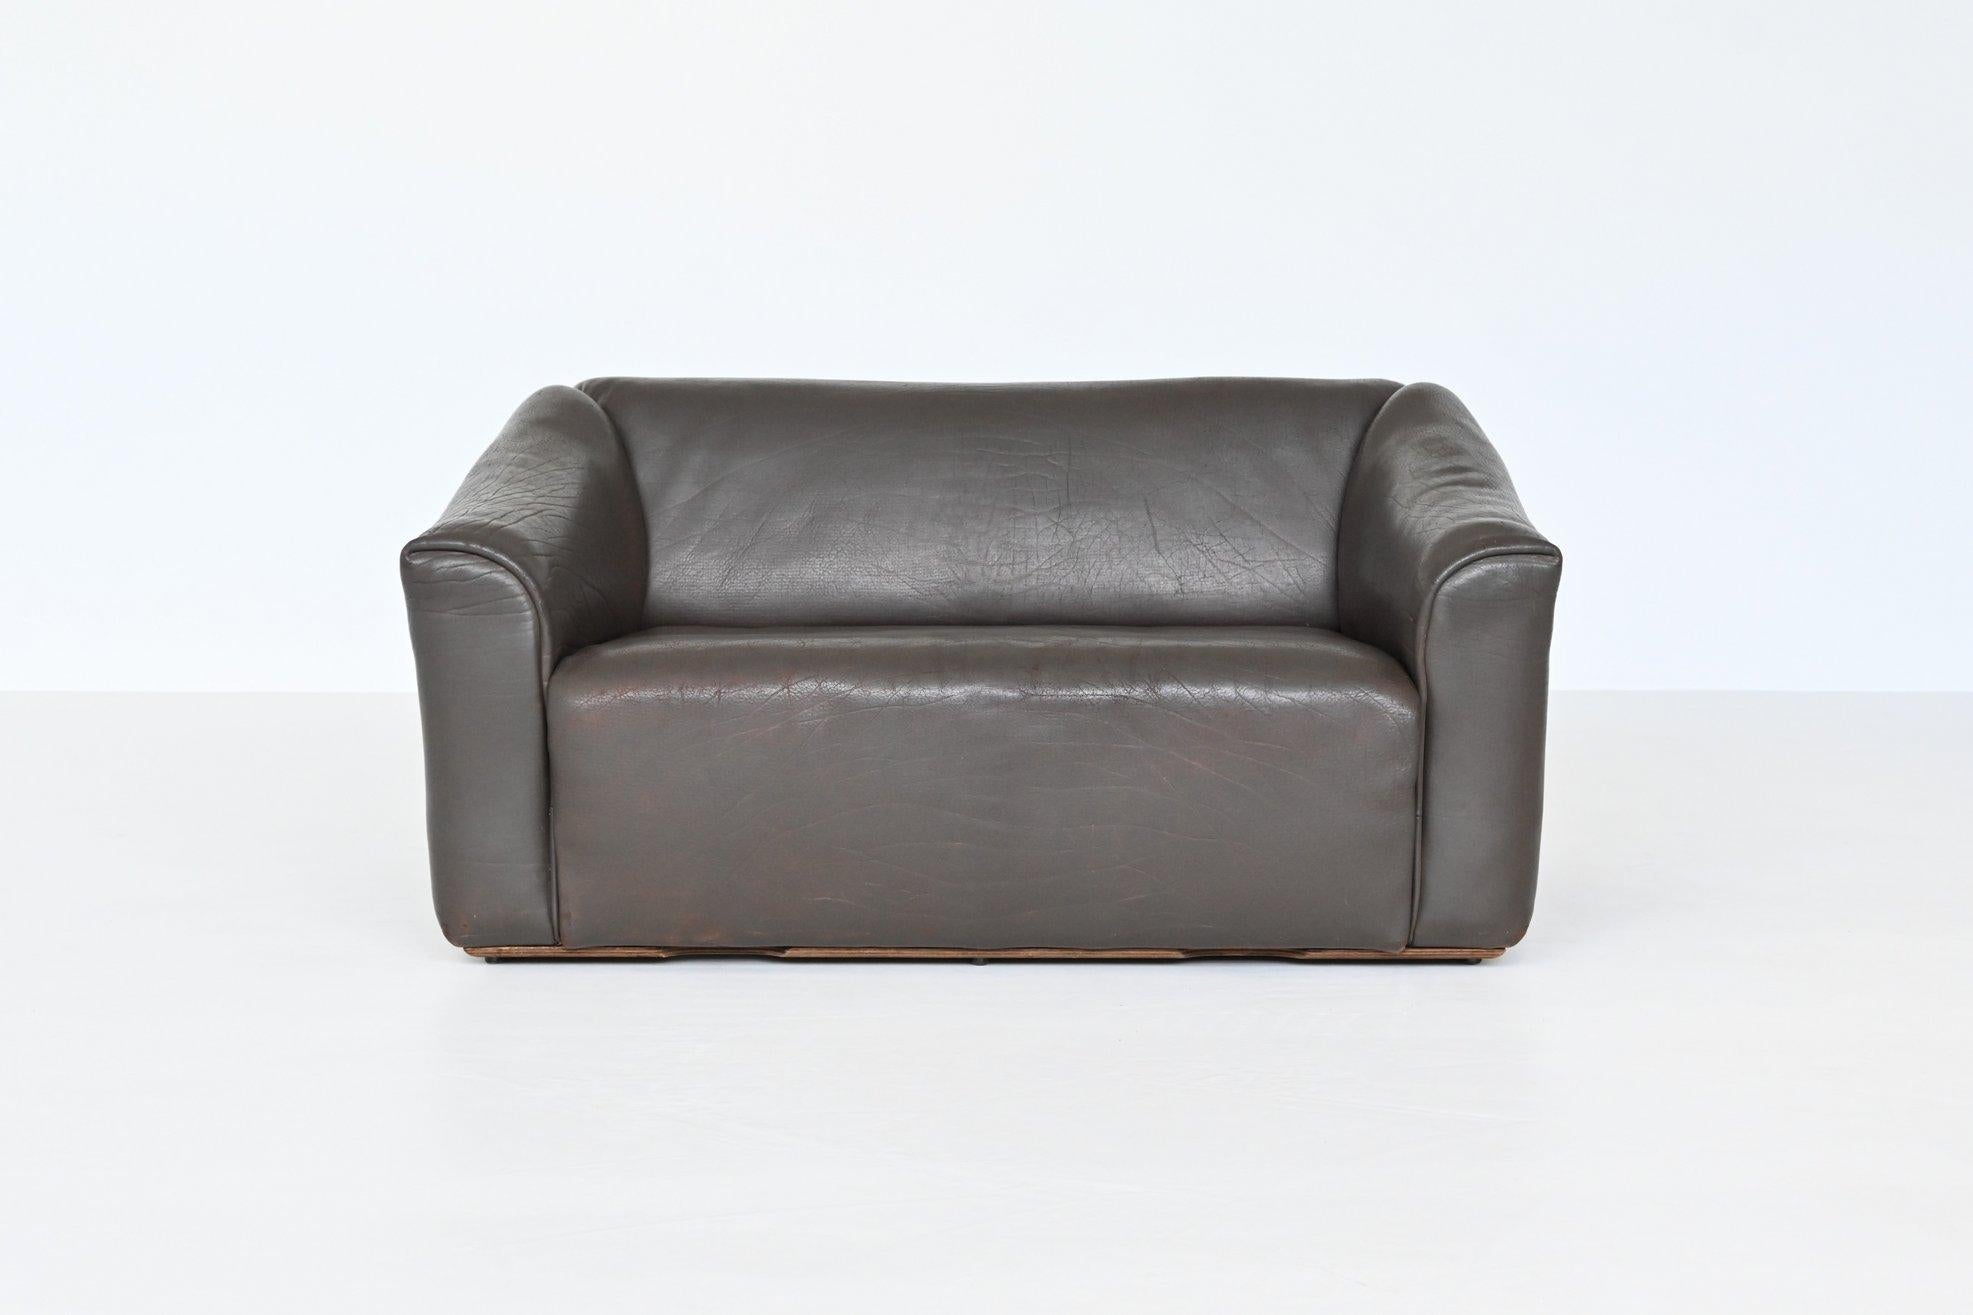 Very comfortable model DS47 two-seater sofa designed and manufactured by De Sede, Switzerland 1970. The sofa is made of high quality dark brown buffalo leather. De Sede is known for its supreme quality leather and comfort seating. The sofa has the